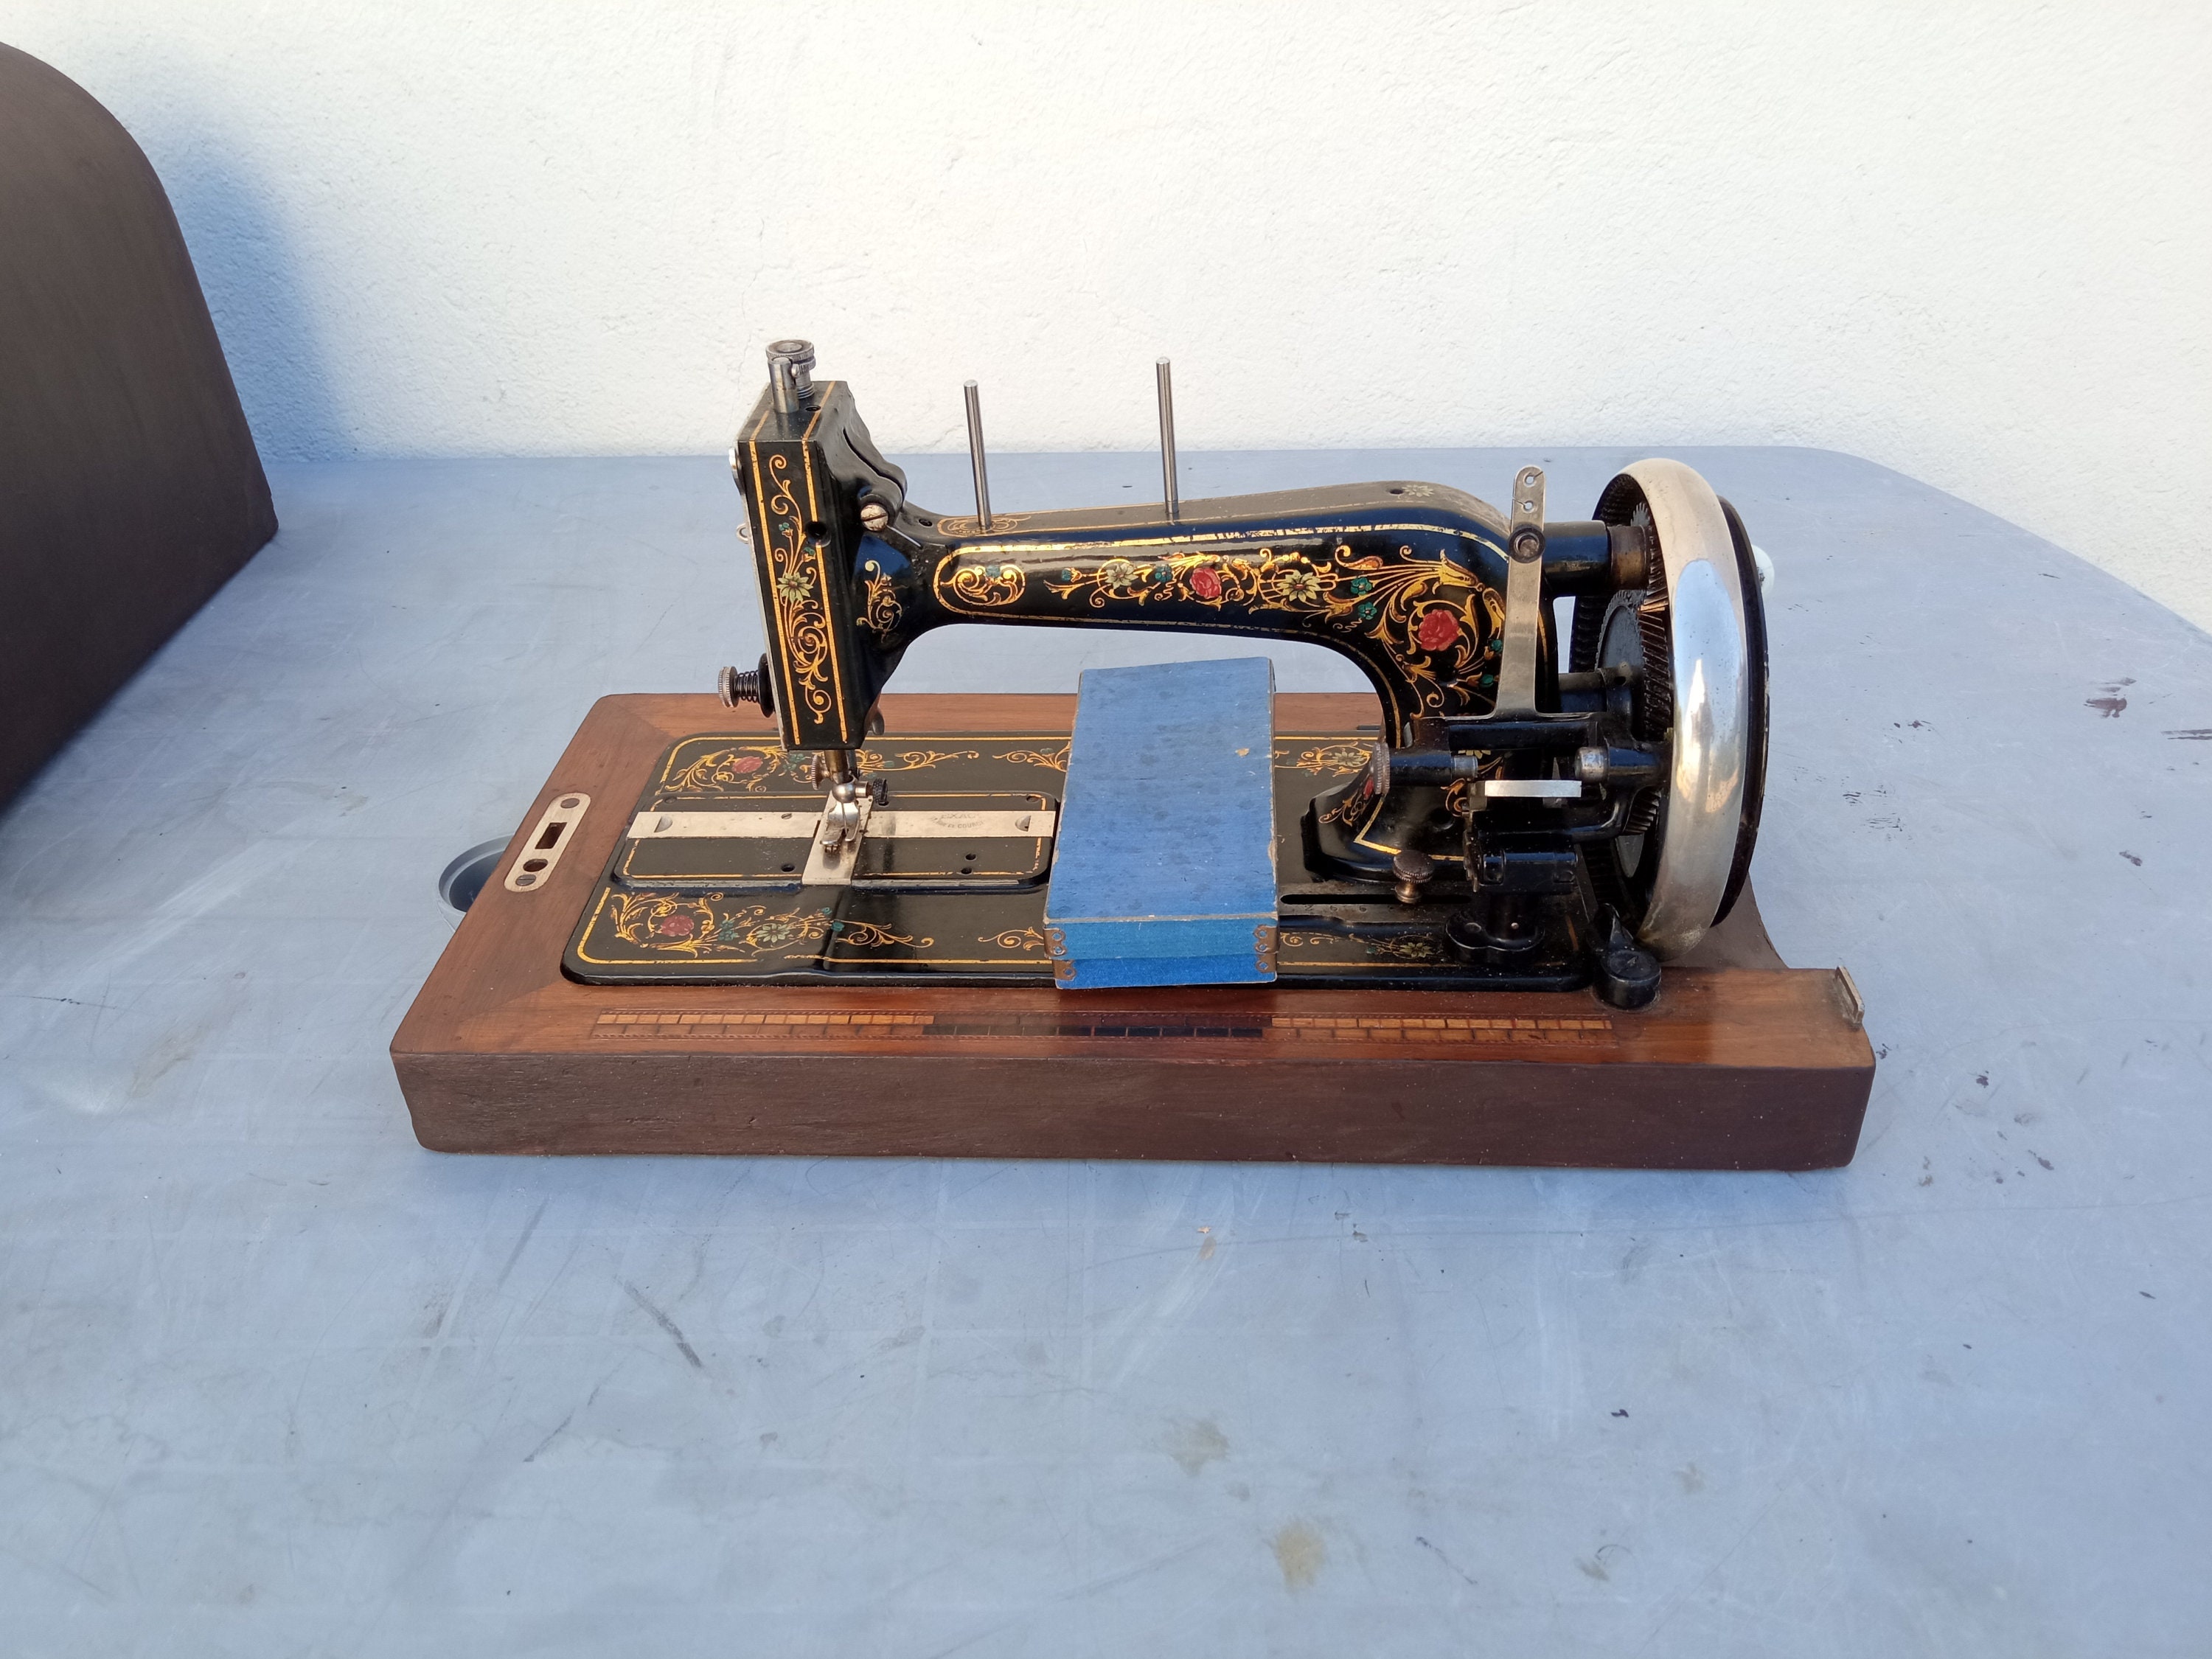 Electrical sewing machine, 1900 For sale as Framed Prints, Photos, Wall Art  and Photo Gifts